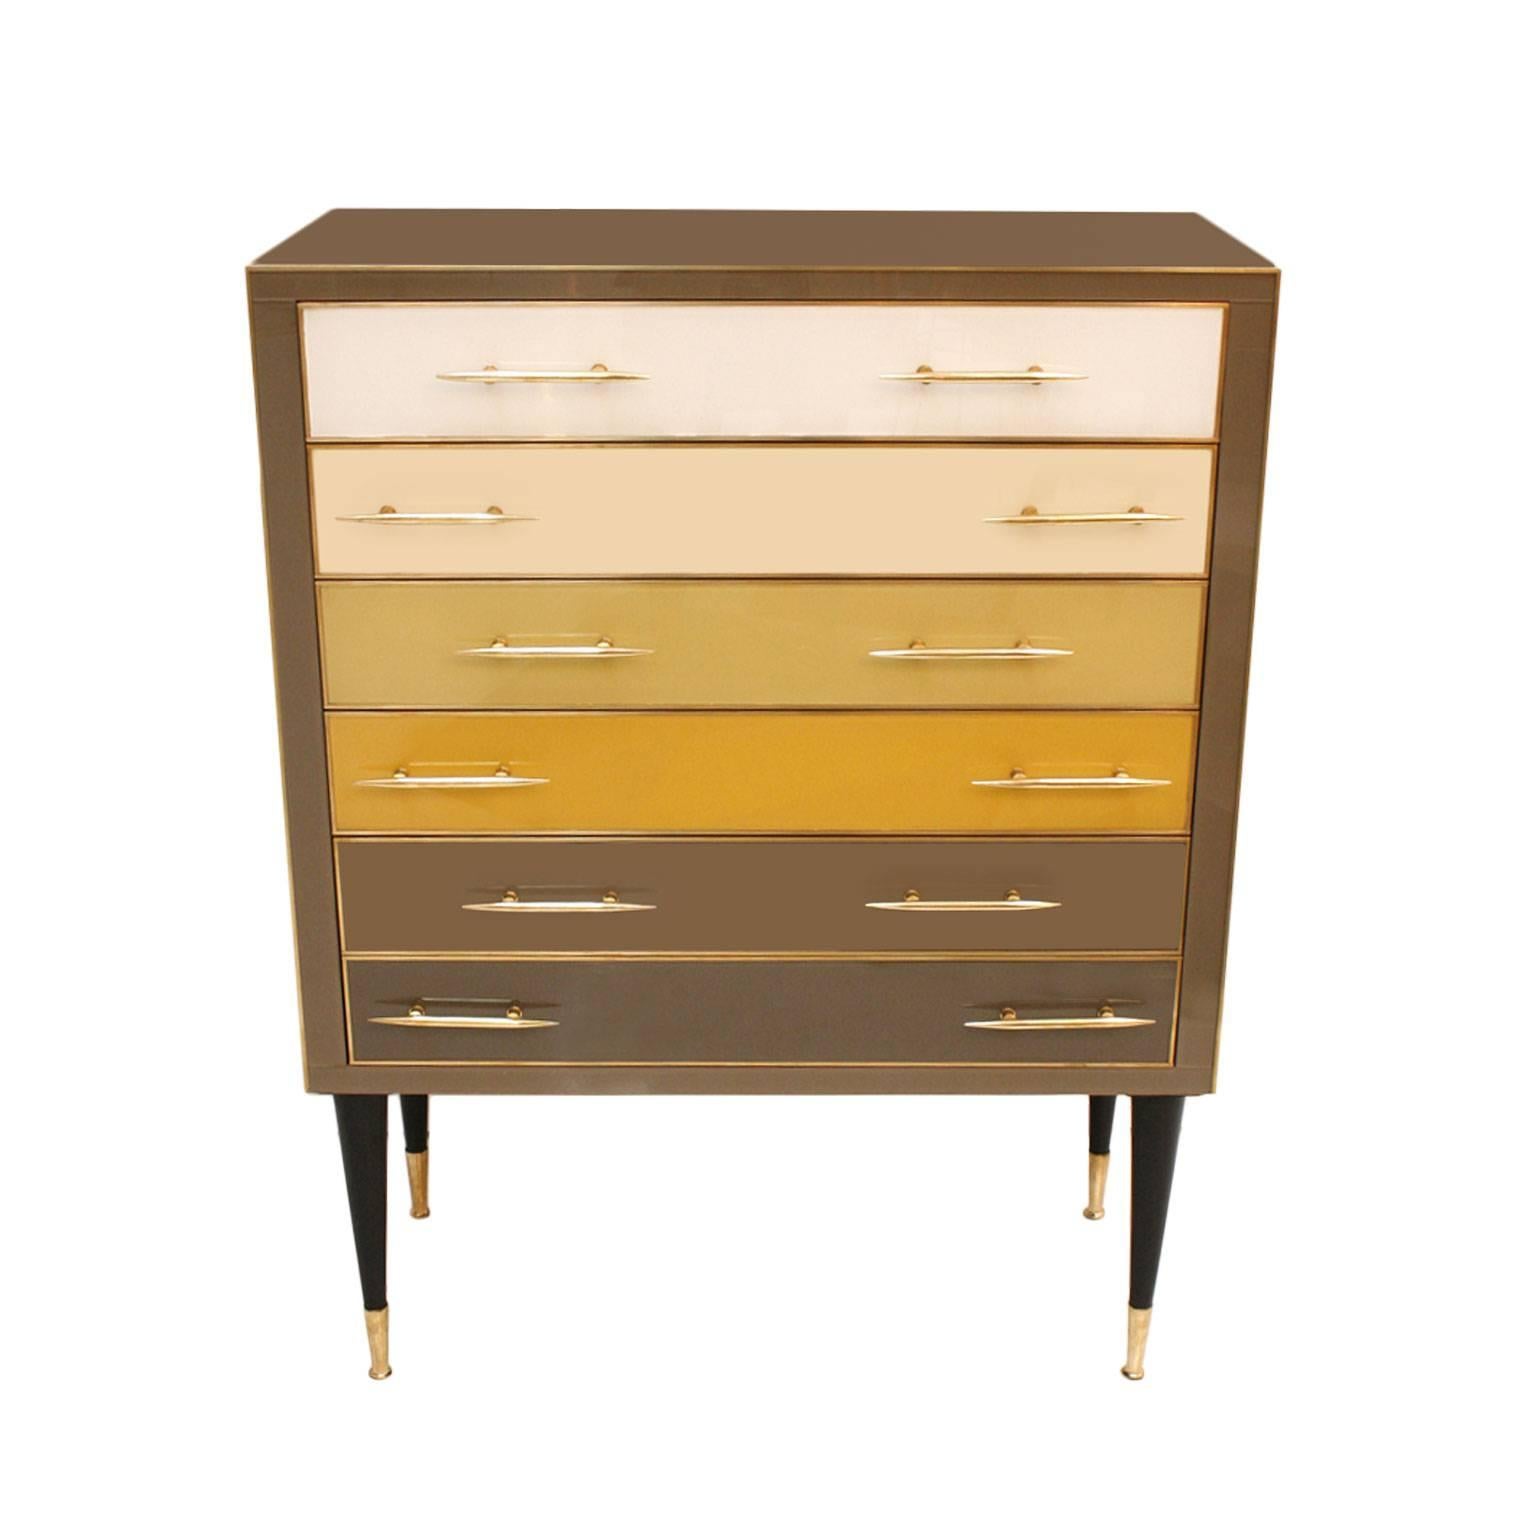 Chest of drawers made up of six drawers, with solid wood structure covered in Murano glass and brass details, Italy.